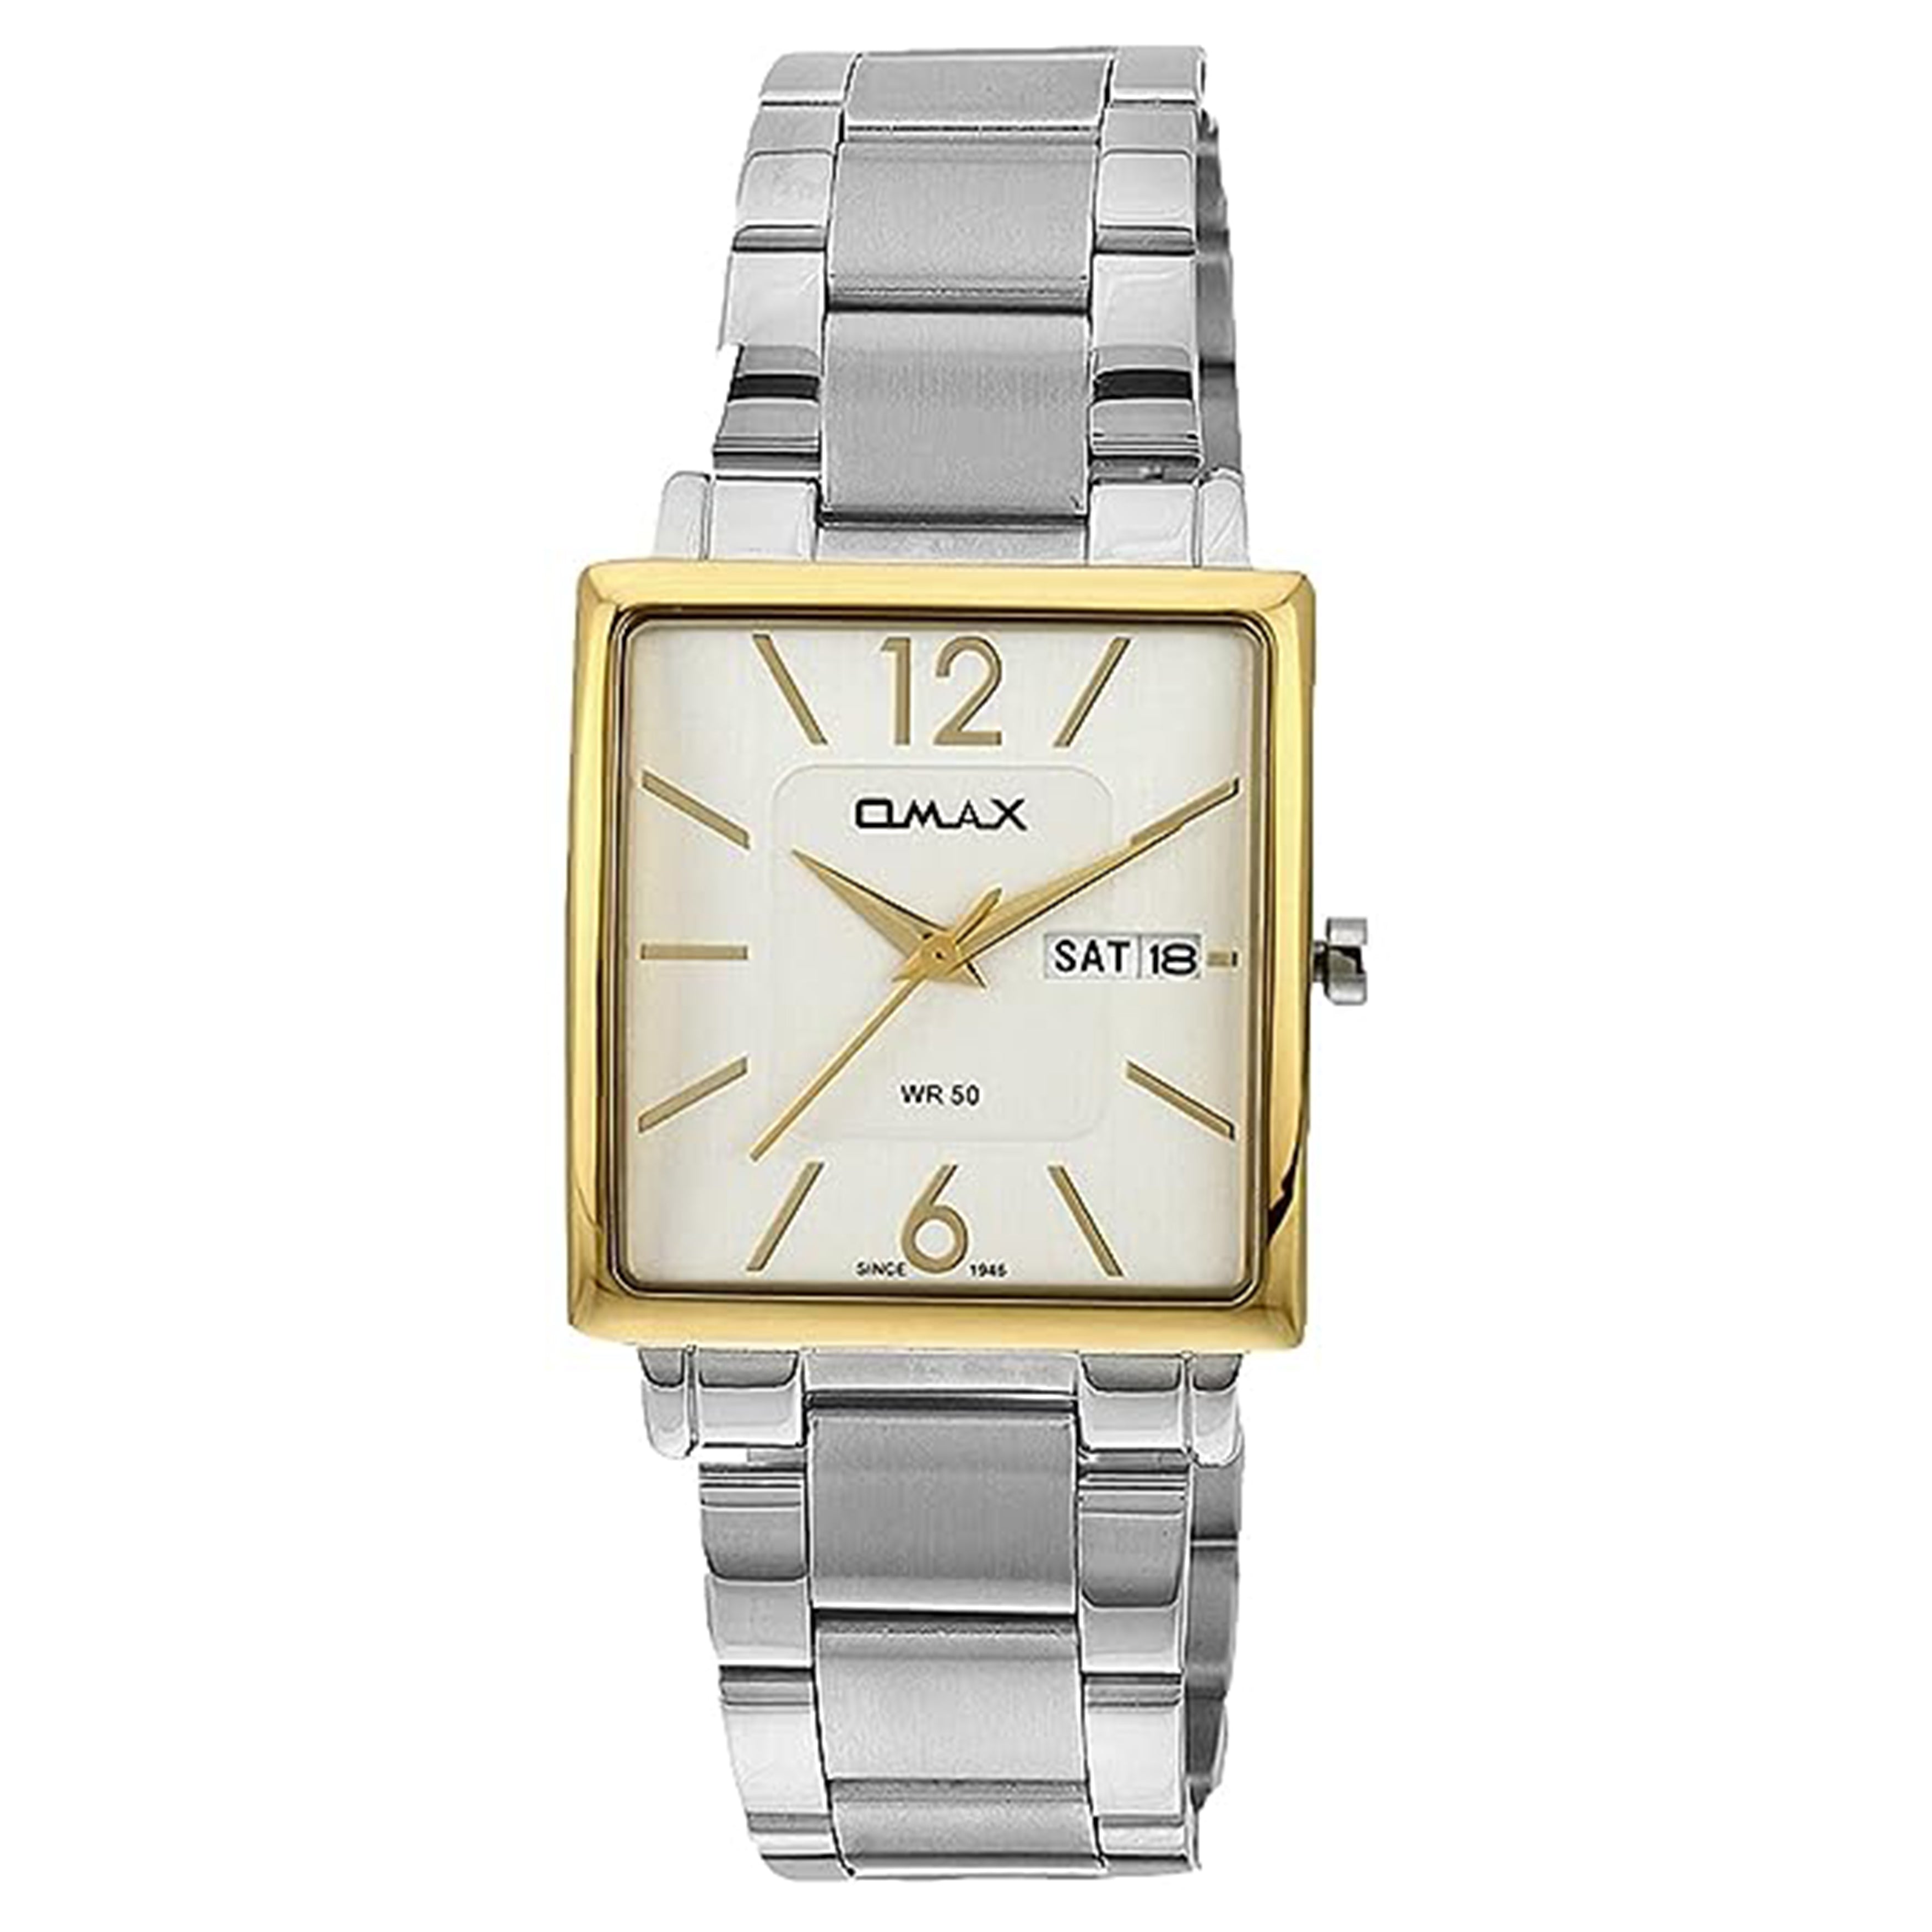 New Geya/Geya watch men's watch mechanical watch full hollow automatic watch  large dial shopping mall with the same style 8258